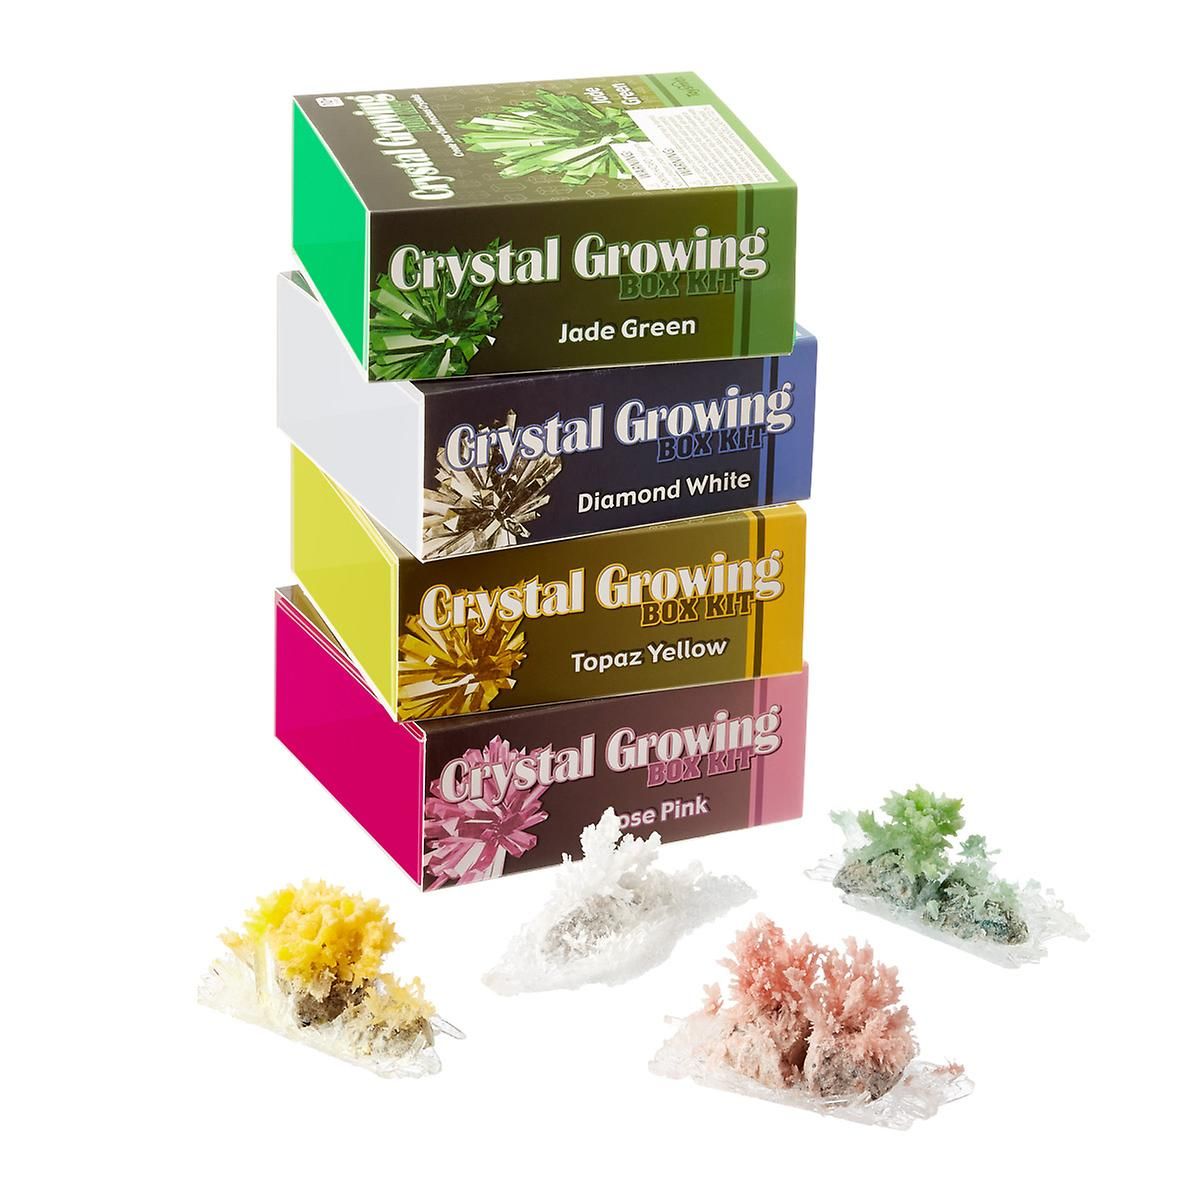 Crystal Growing Box Kit | The Container Store